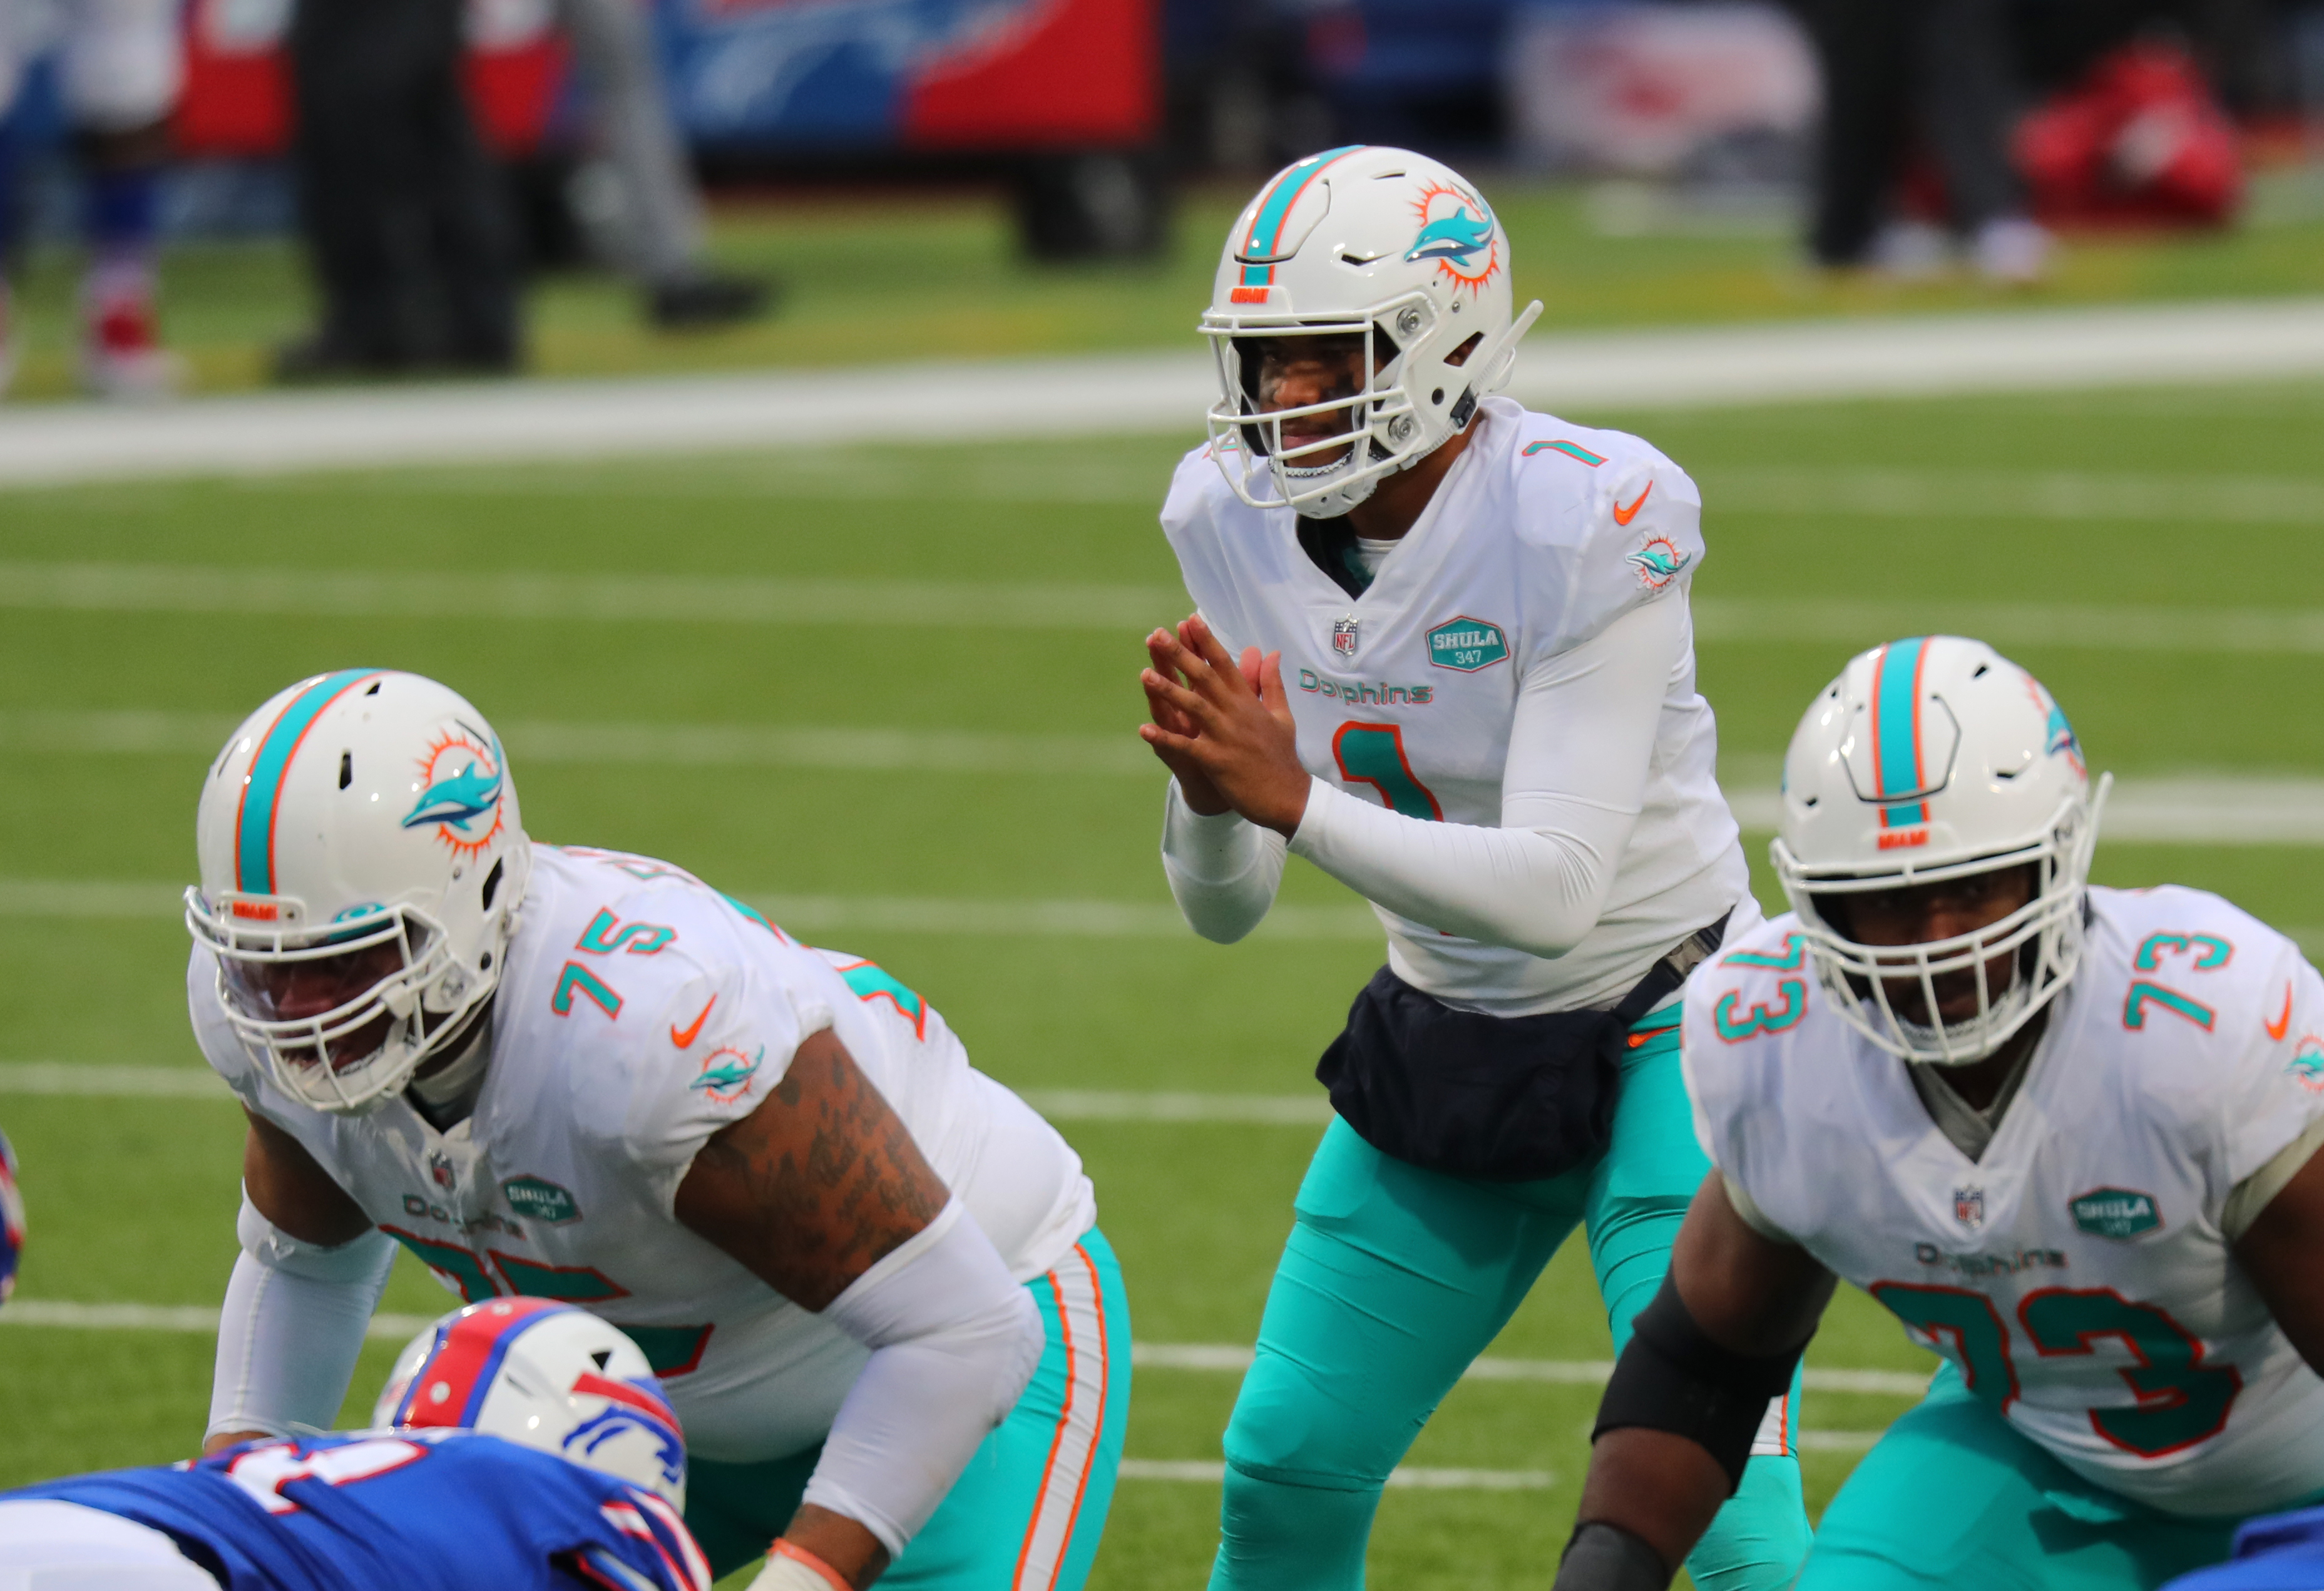 Tua Tagovailoa #1 of the Miami Dolphins waits for the snap during a game against the Buffalo Bills at Bills Stadium on January 3, 2021 in Orchard Park, New York.